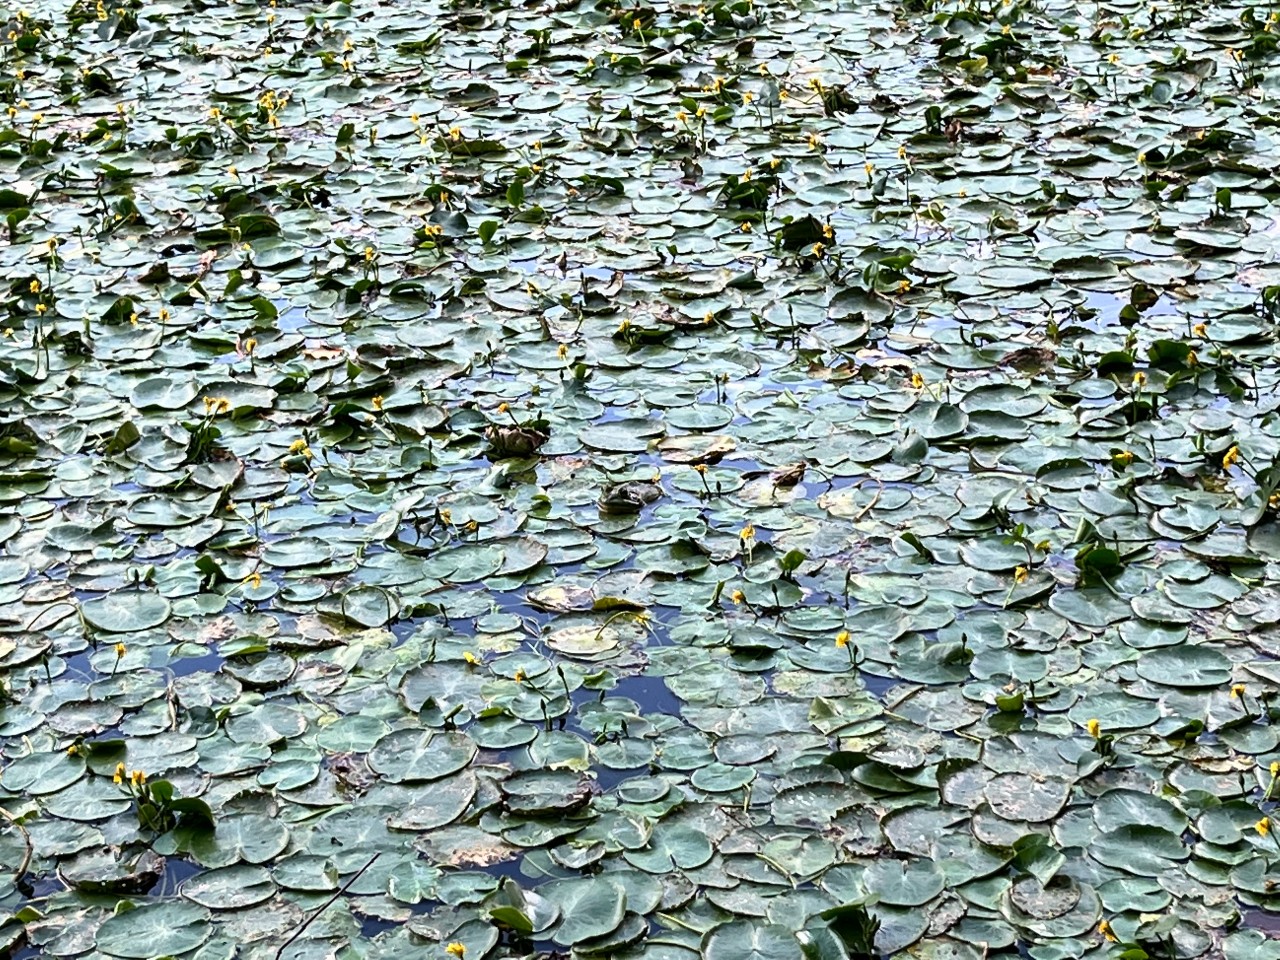 A closeup of lily pads at Prospect Park Lake